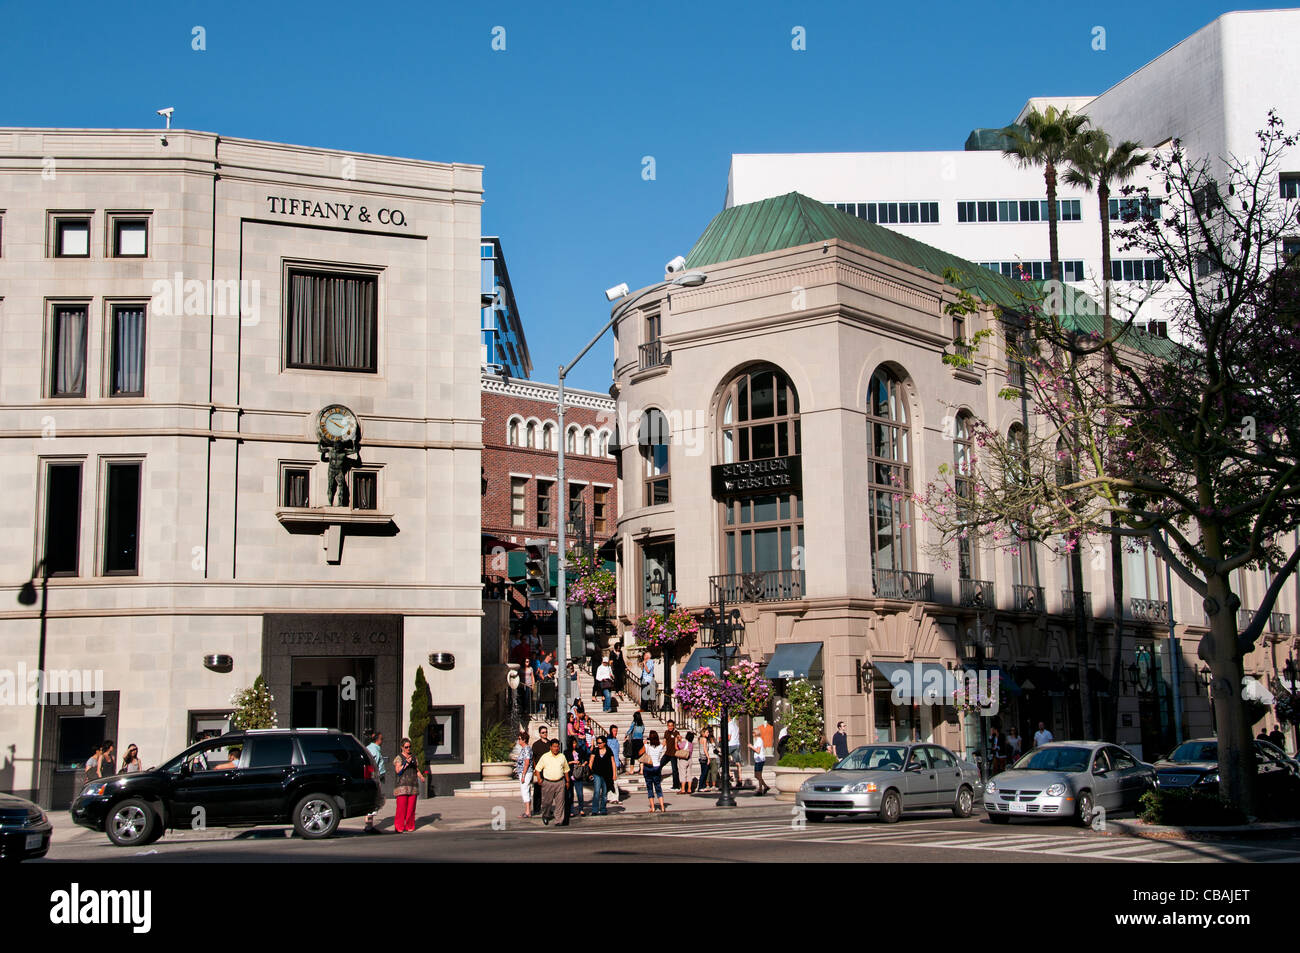 Tiffany jewelry Rodeo Drive boutiques shops Beverly Hills Los Angeles ...